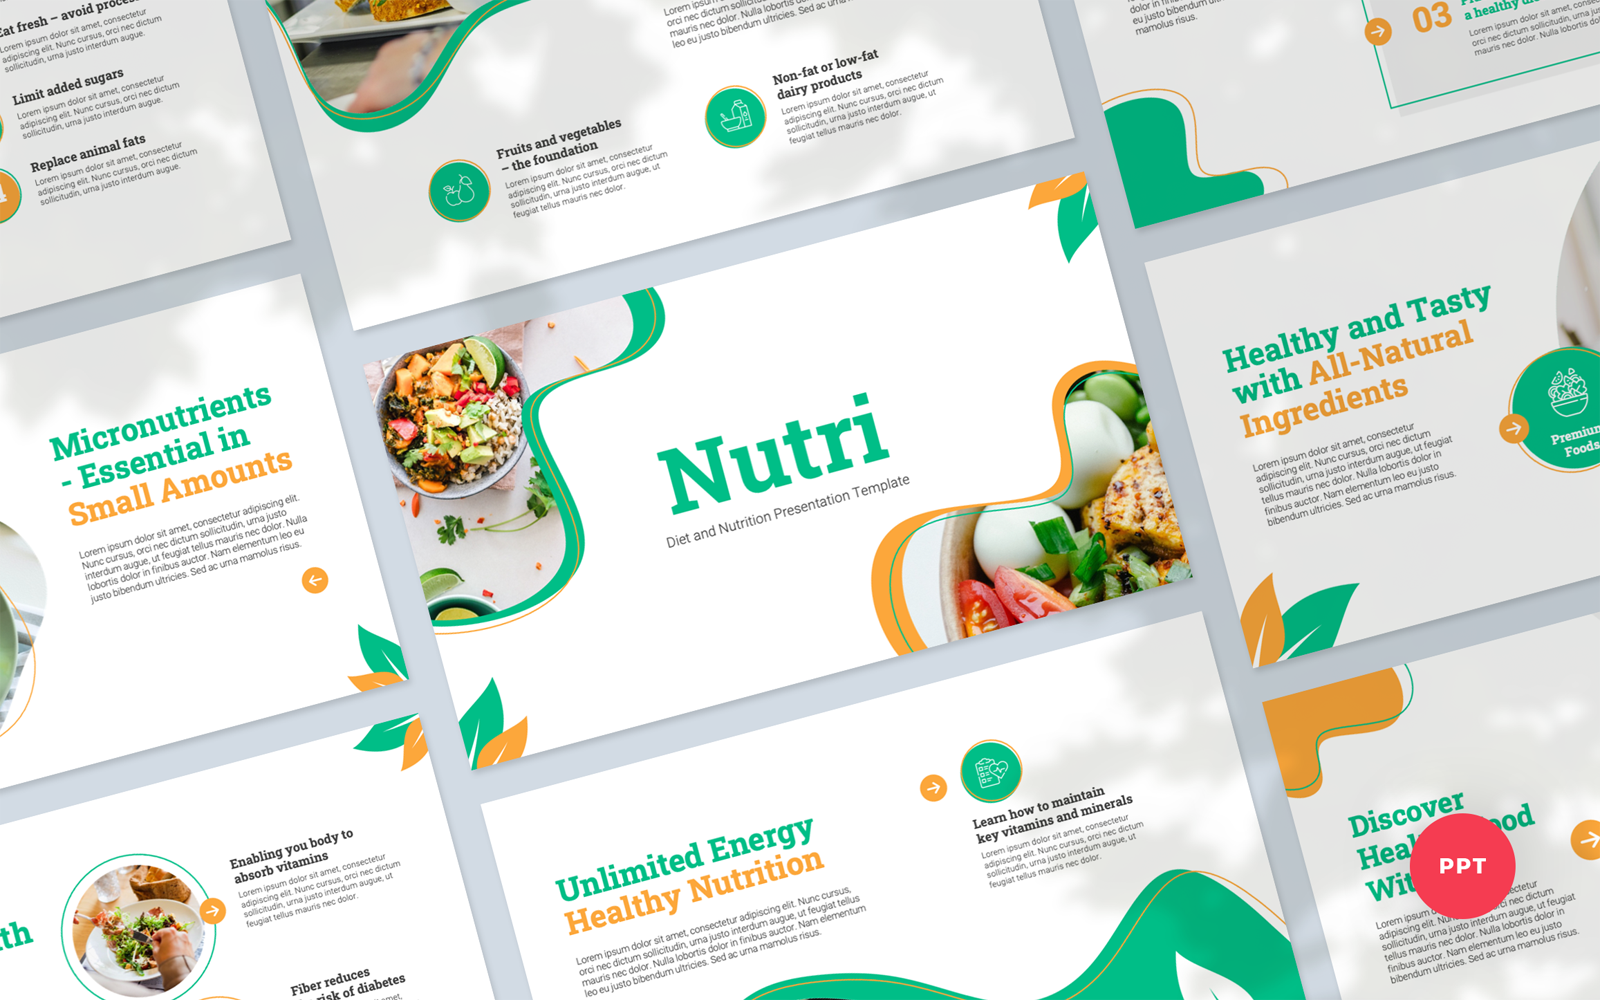 Nutri - Diet and Nutrition Presentation PowerPoint Template